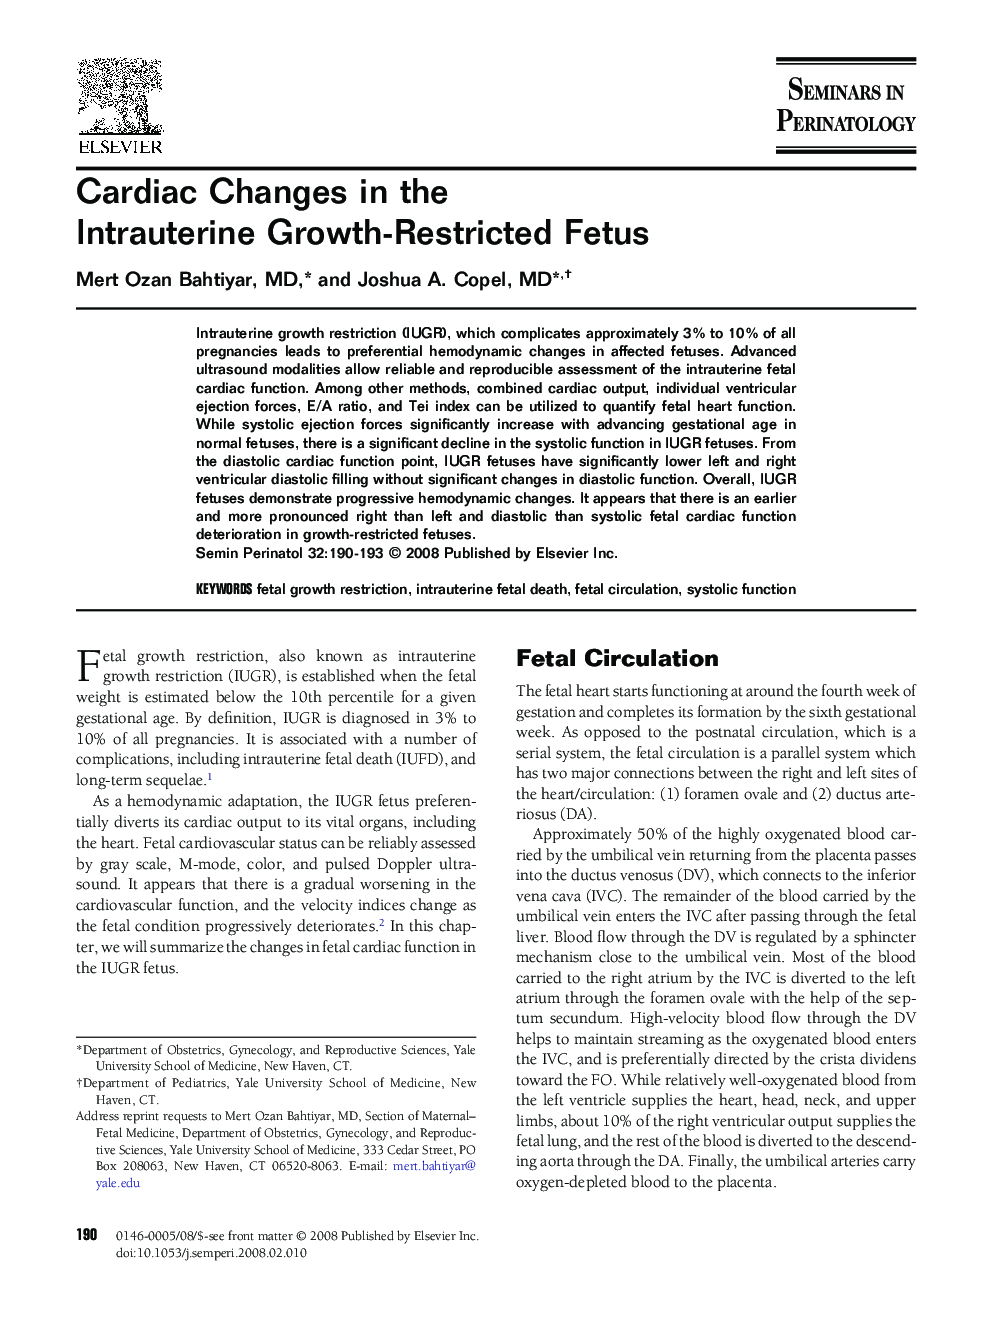 Cardiac Changes in the Intrauterine Growth-Restricted Fetus